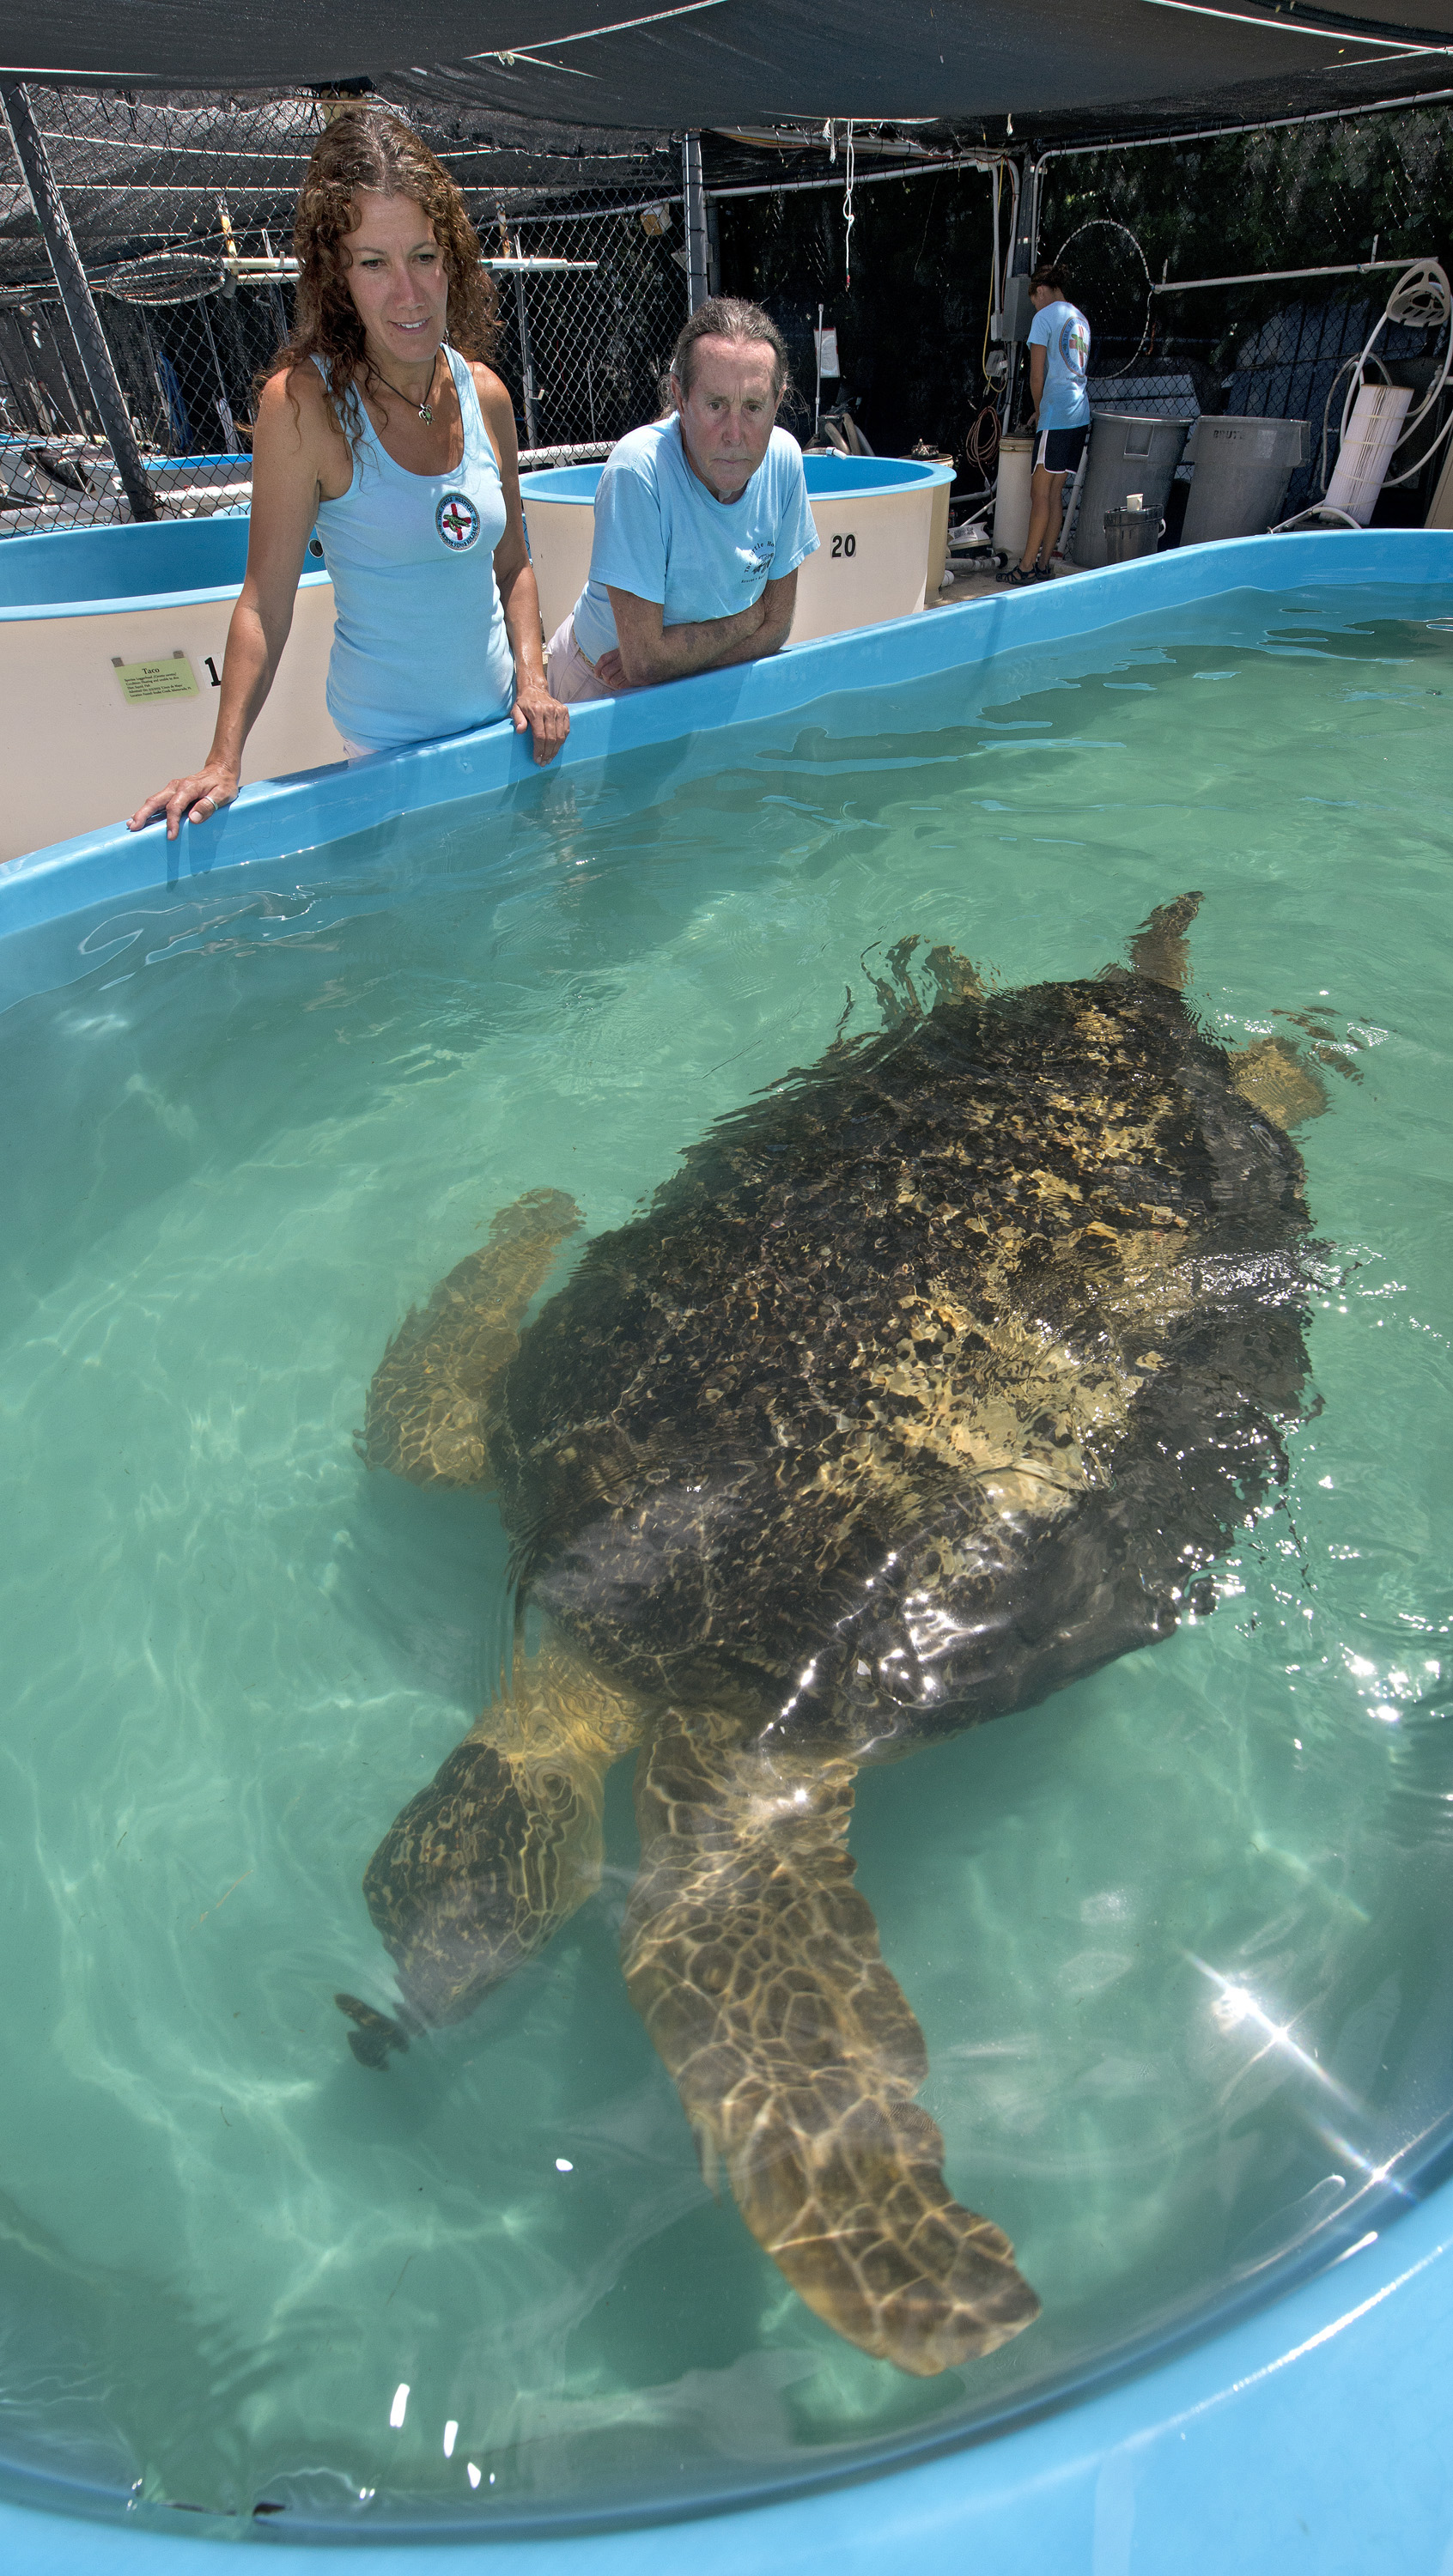 The Turtle Hospital in Marathon opened in 1986 as the world's first state licensed veterinary sea turtle hospital.